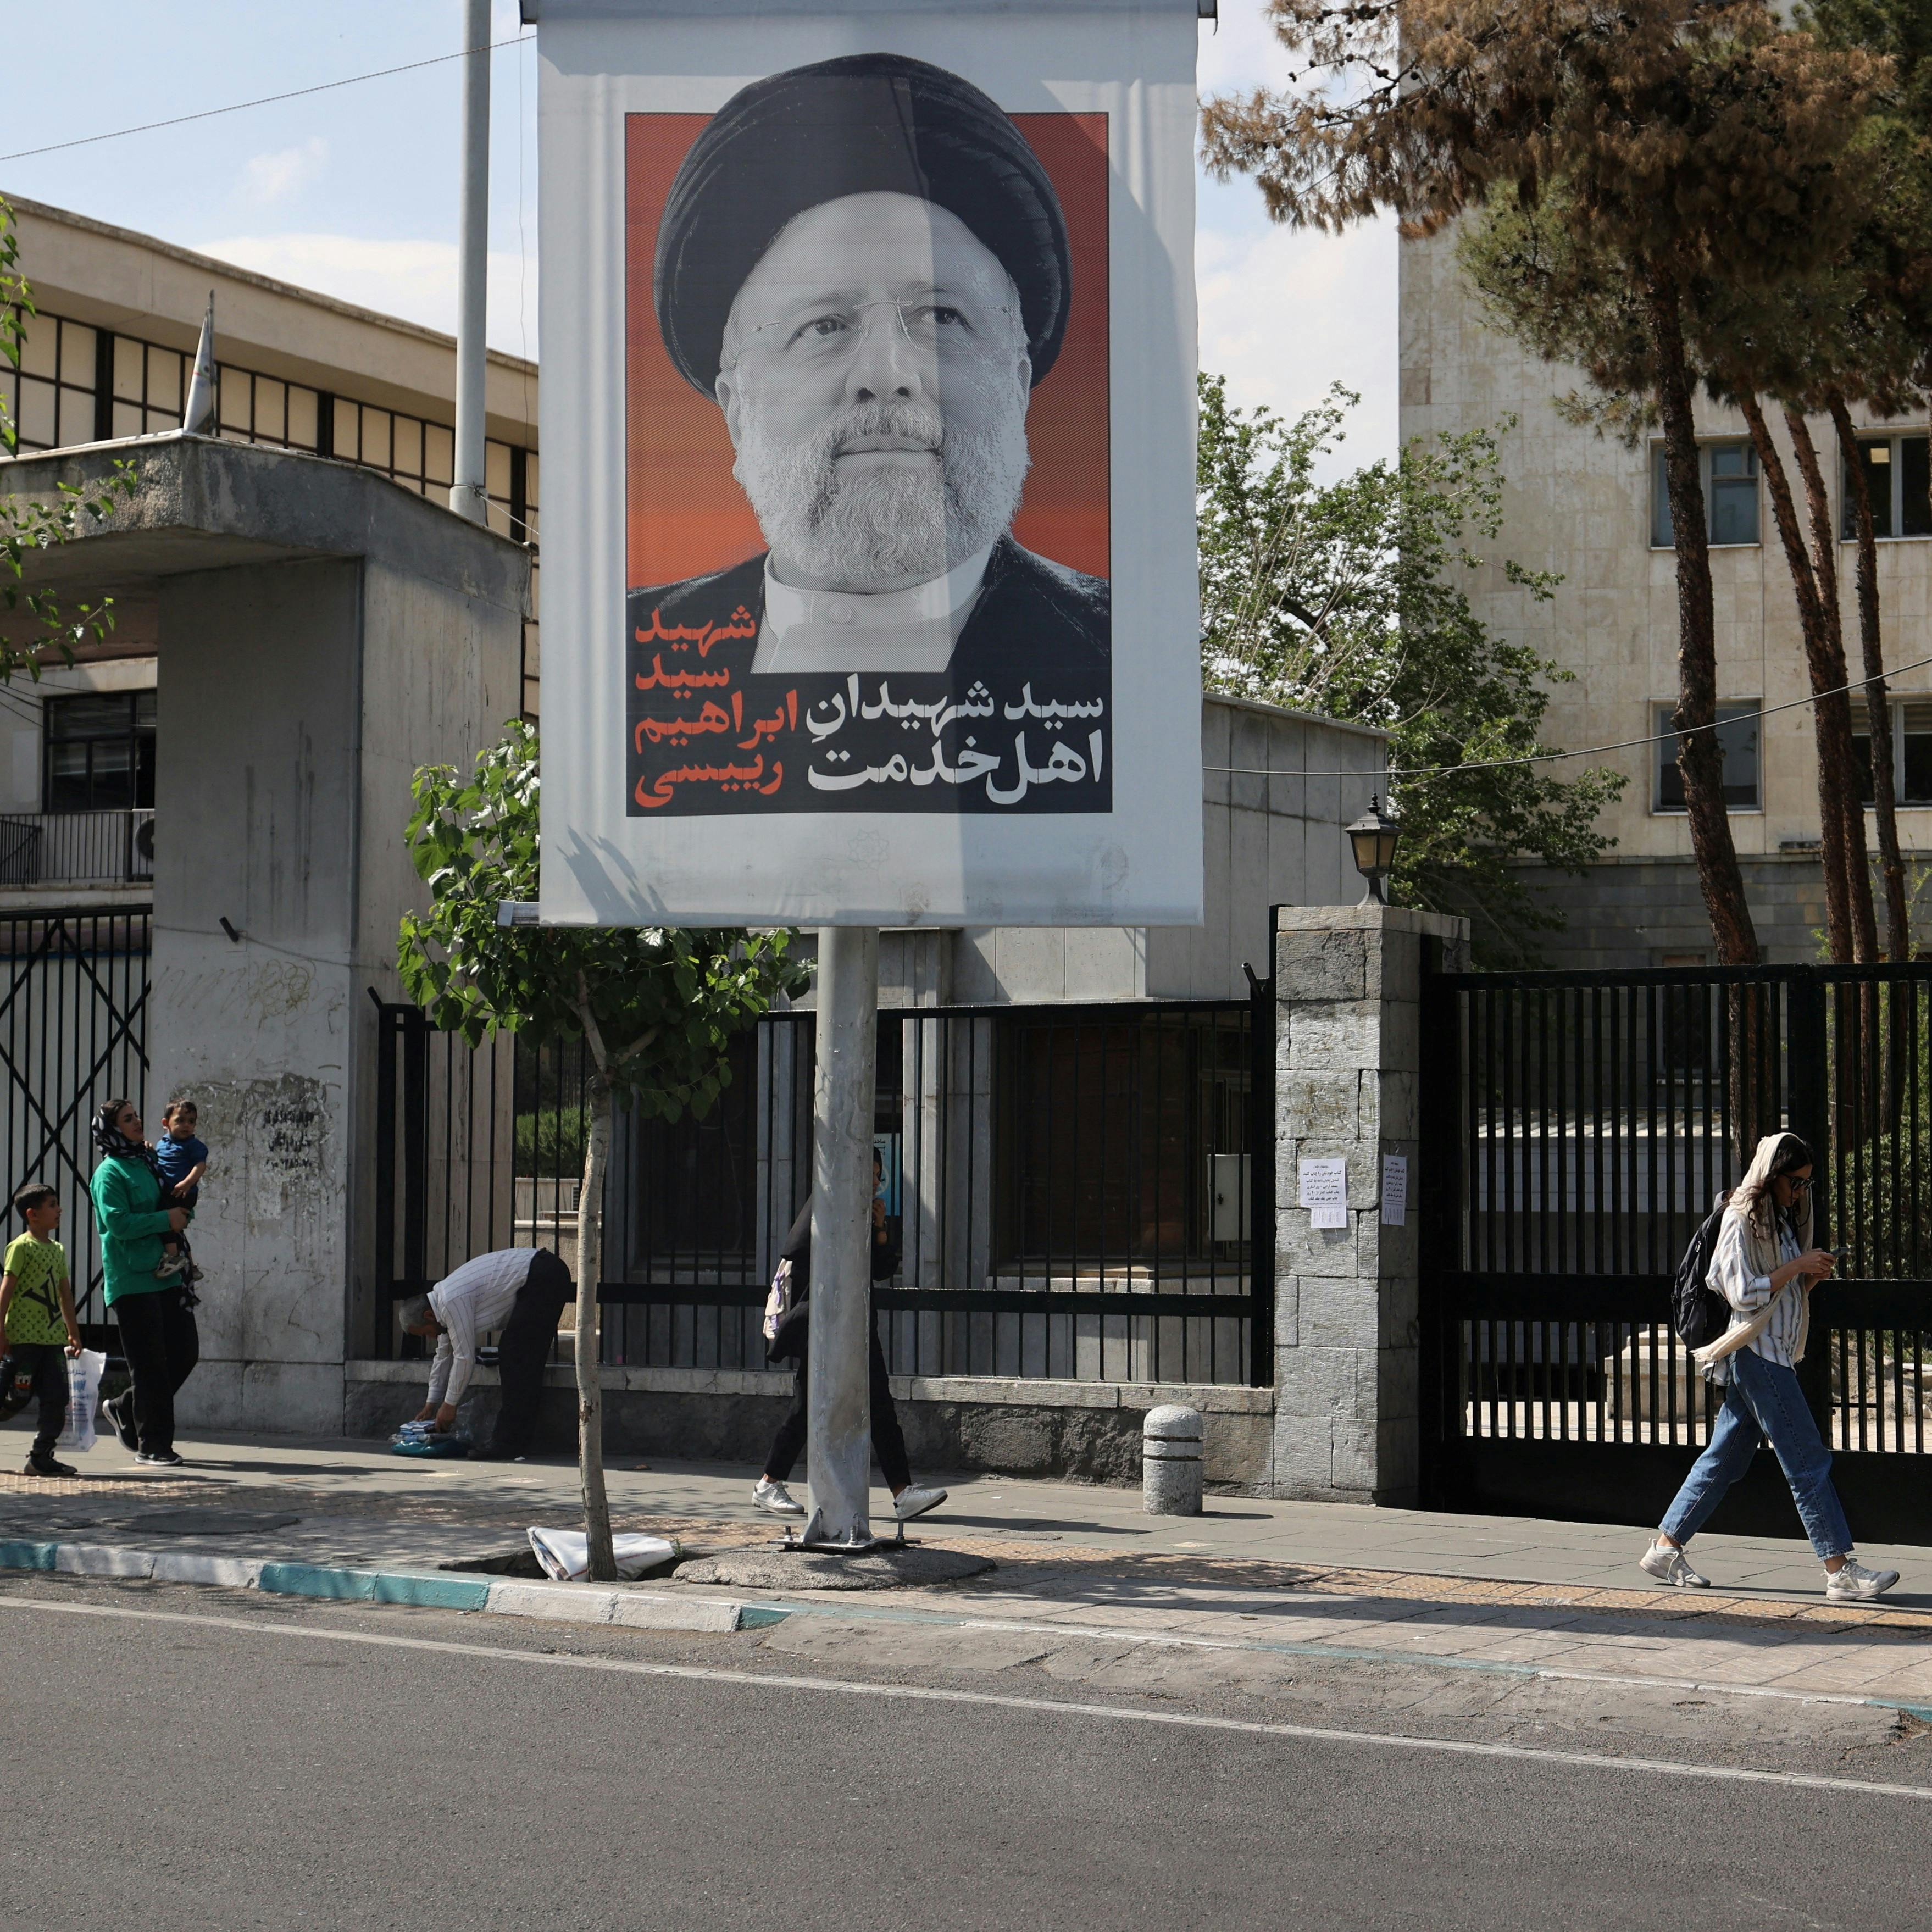 Iran's president dead, Assange extradition decision and Taiwan's new president